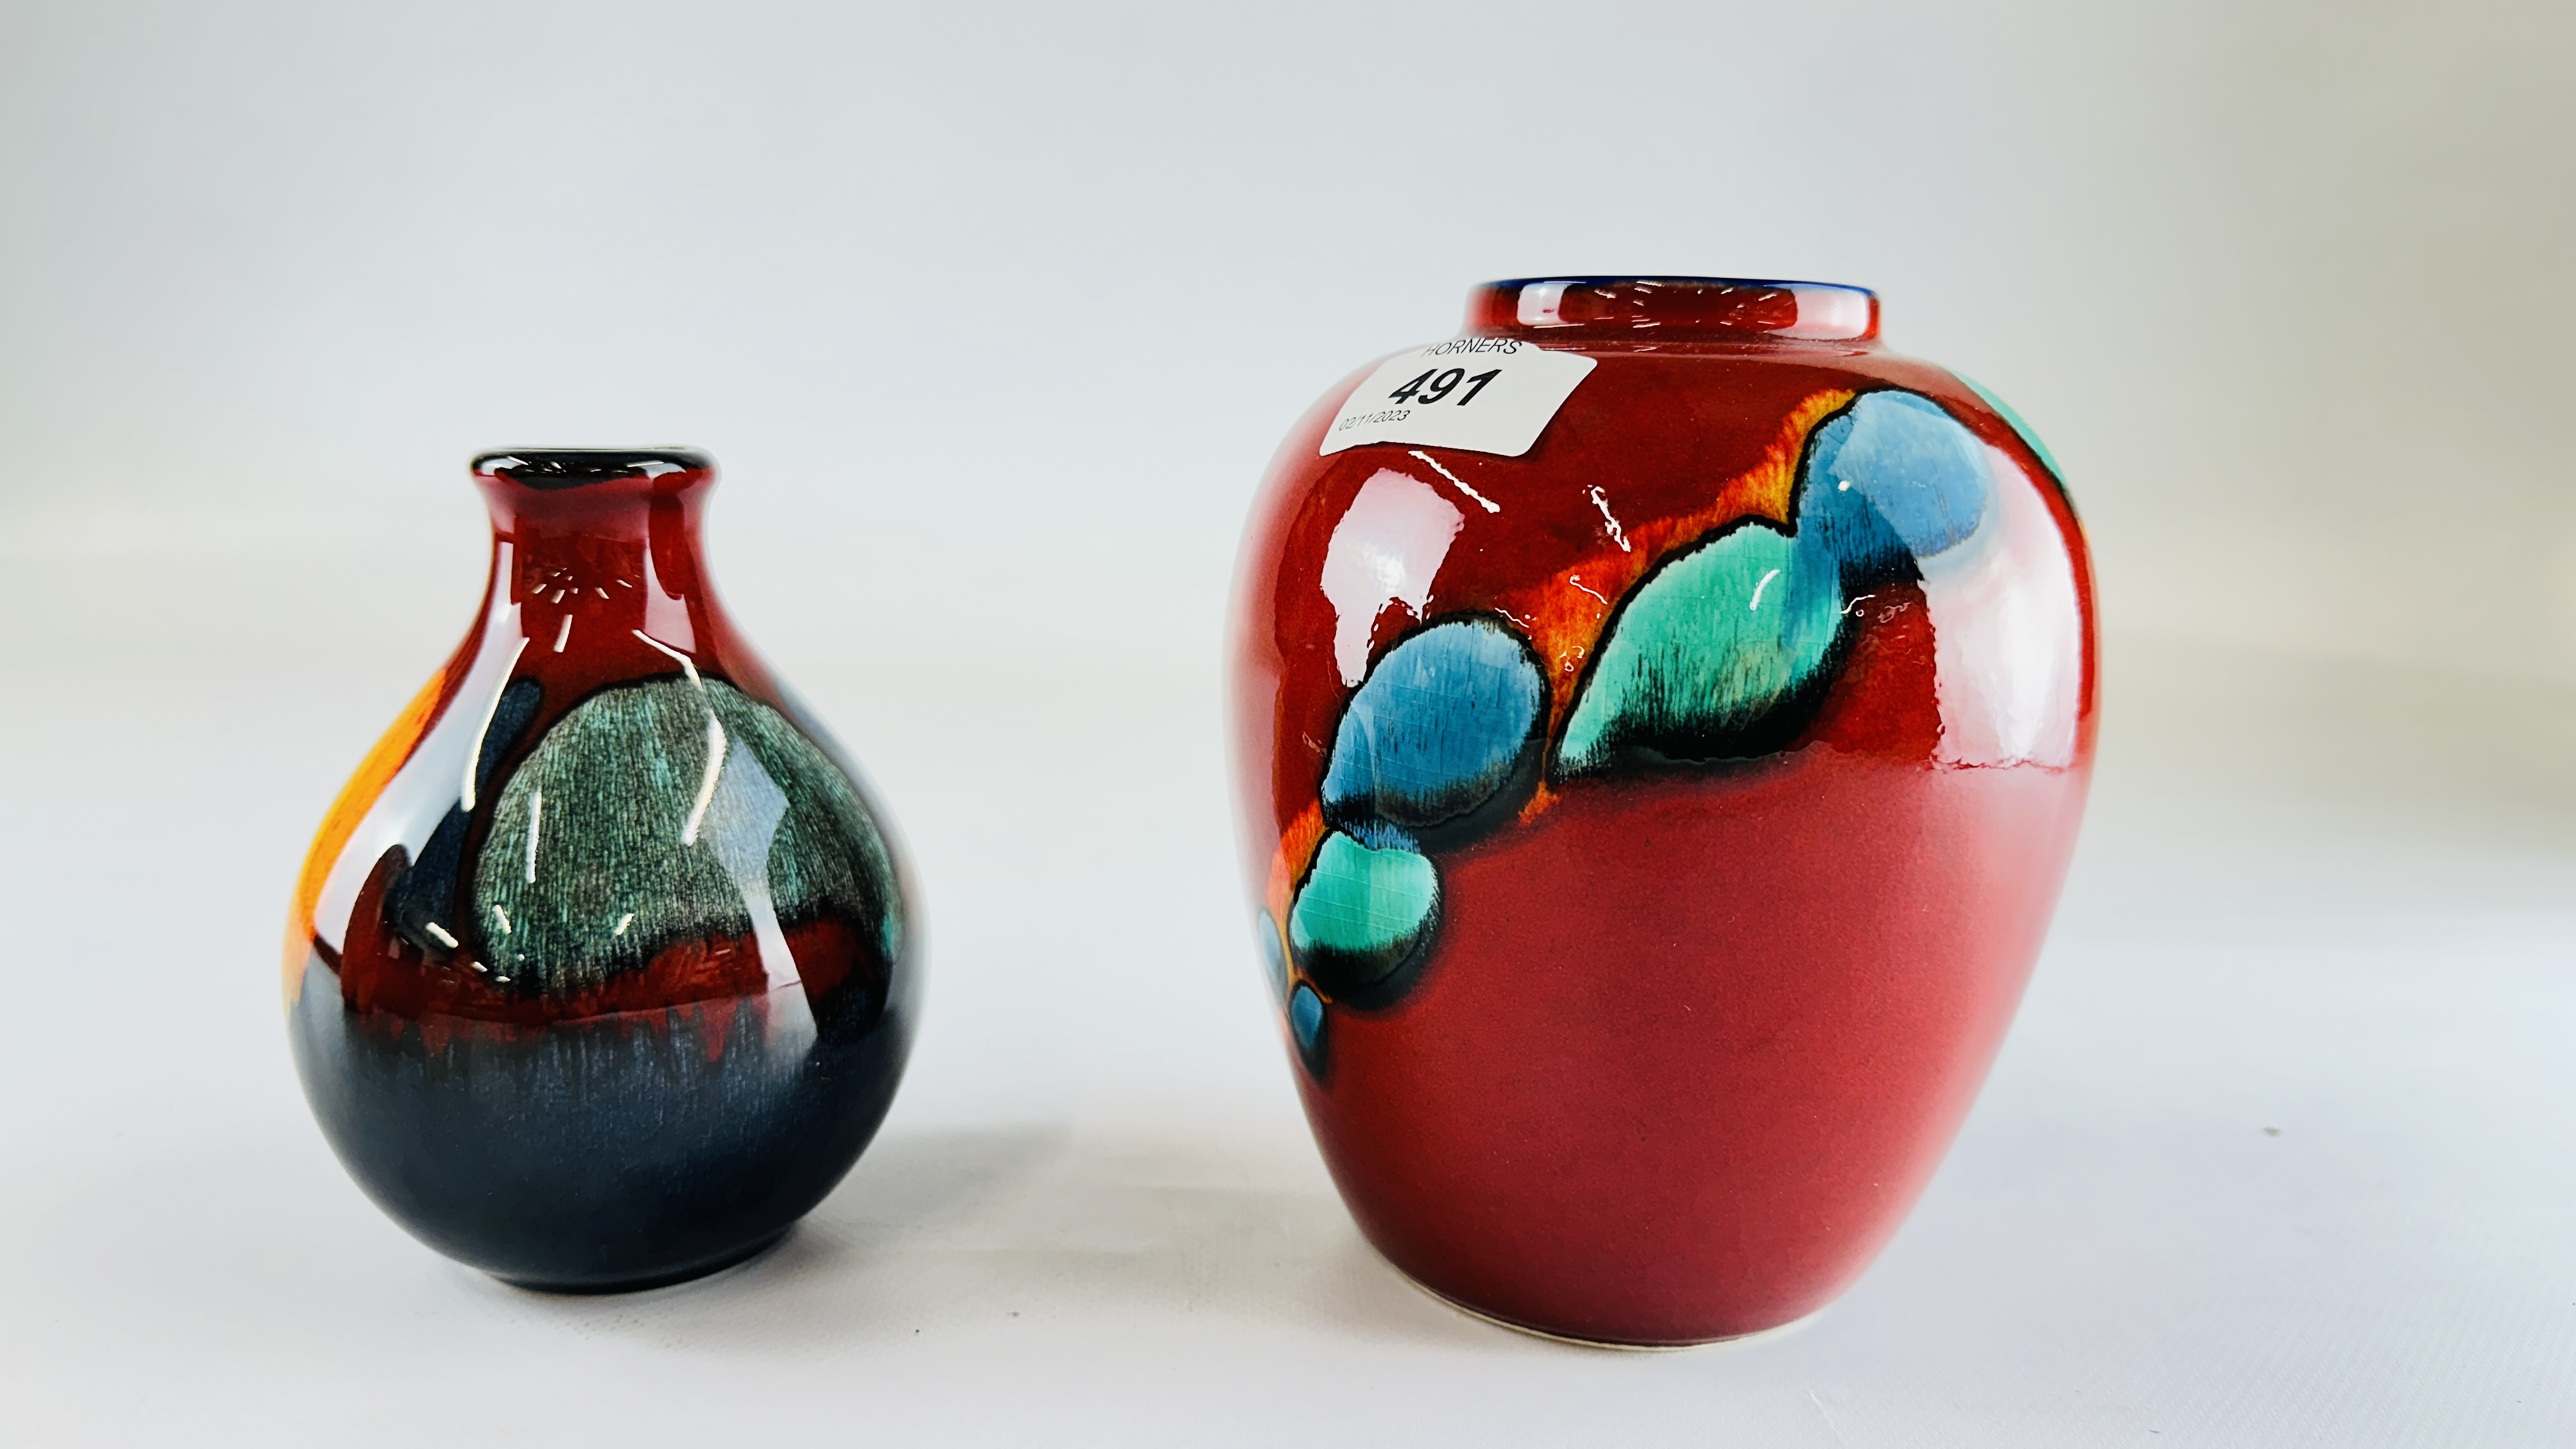 TWO POOLE POTTERY "LIVING GLAZE" VASES TO INCLUDE A VOLCANO EXAMPLE H 15CM.